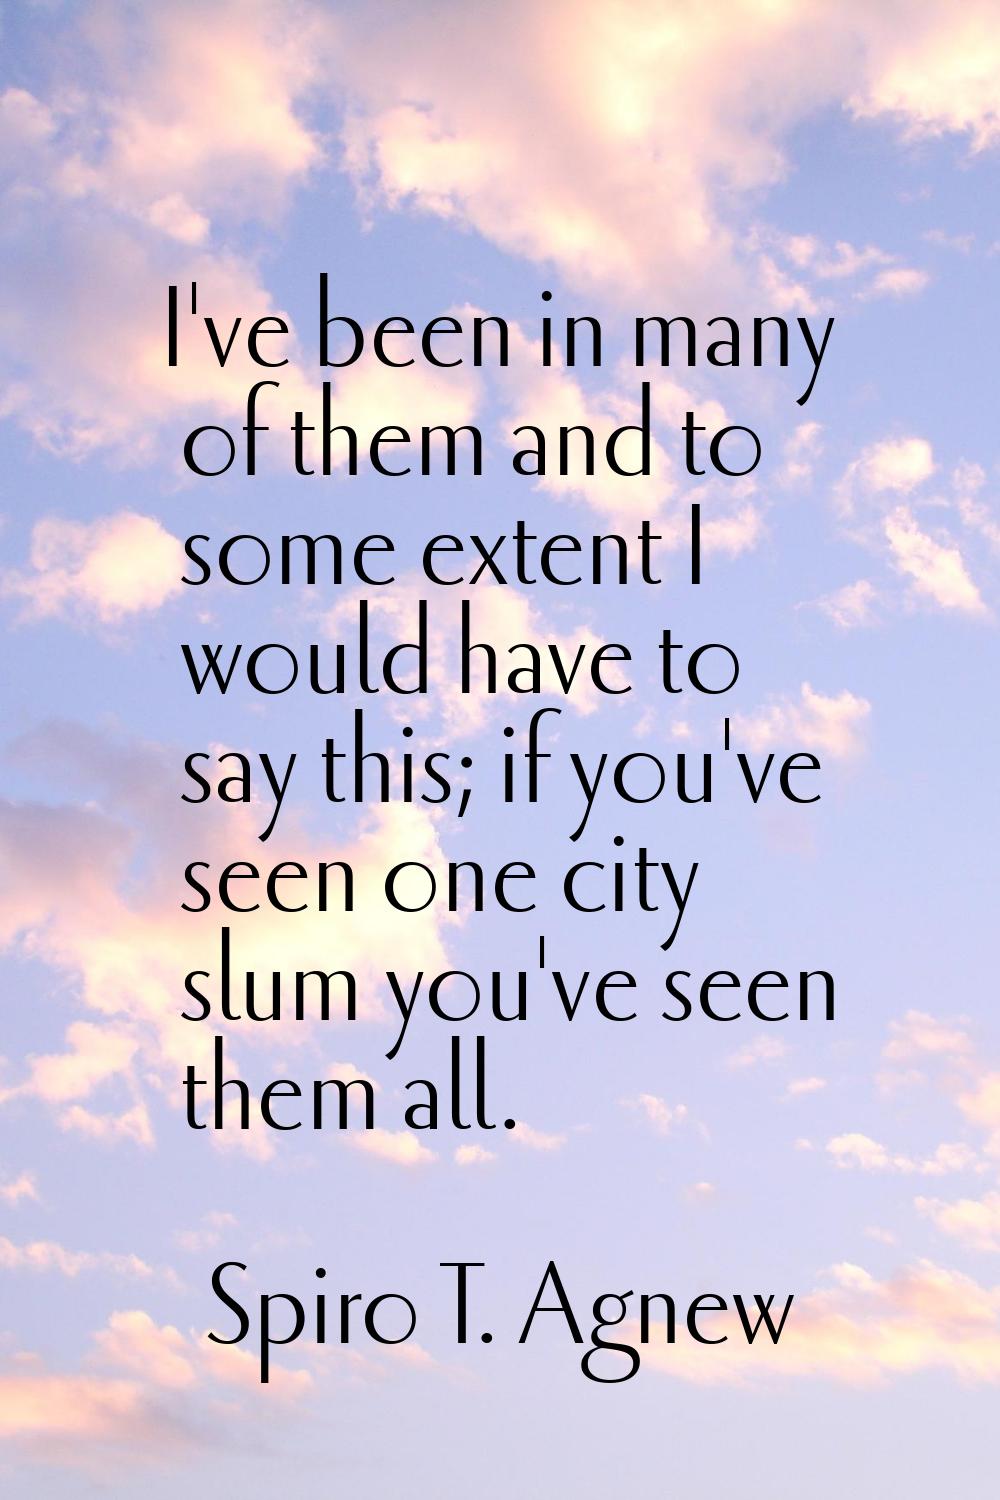 I've been in many of them and to some extent I would have to say this; if you've seen one city slum